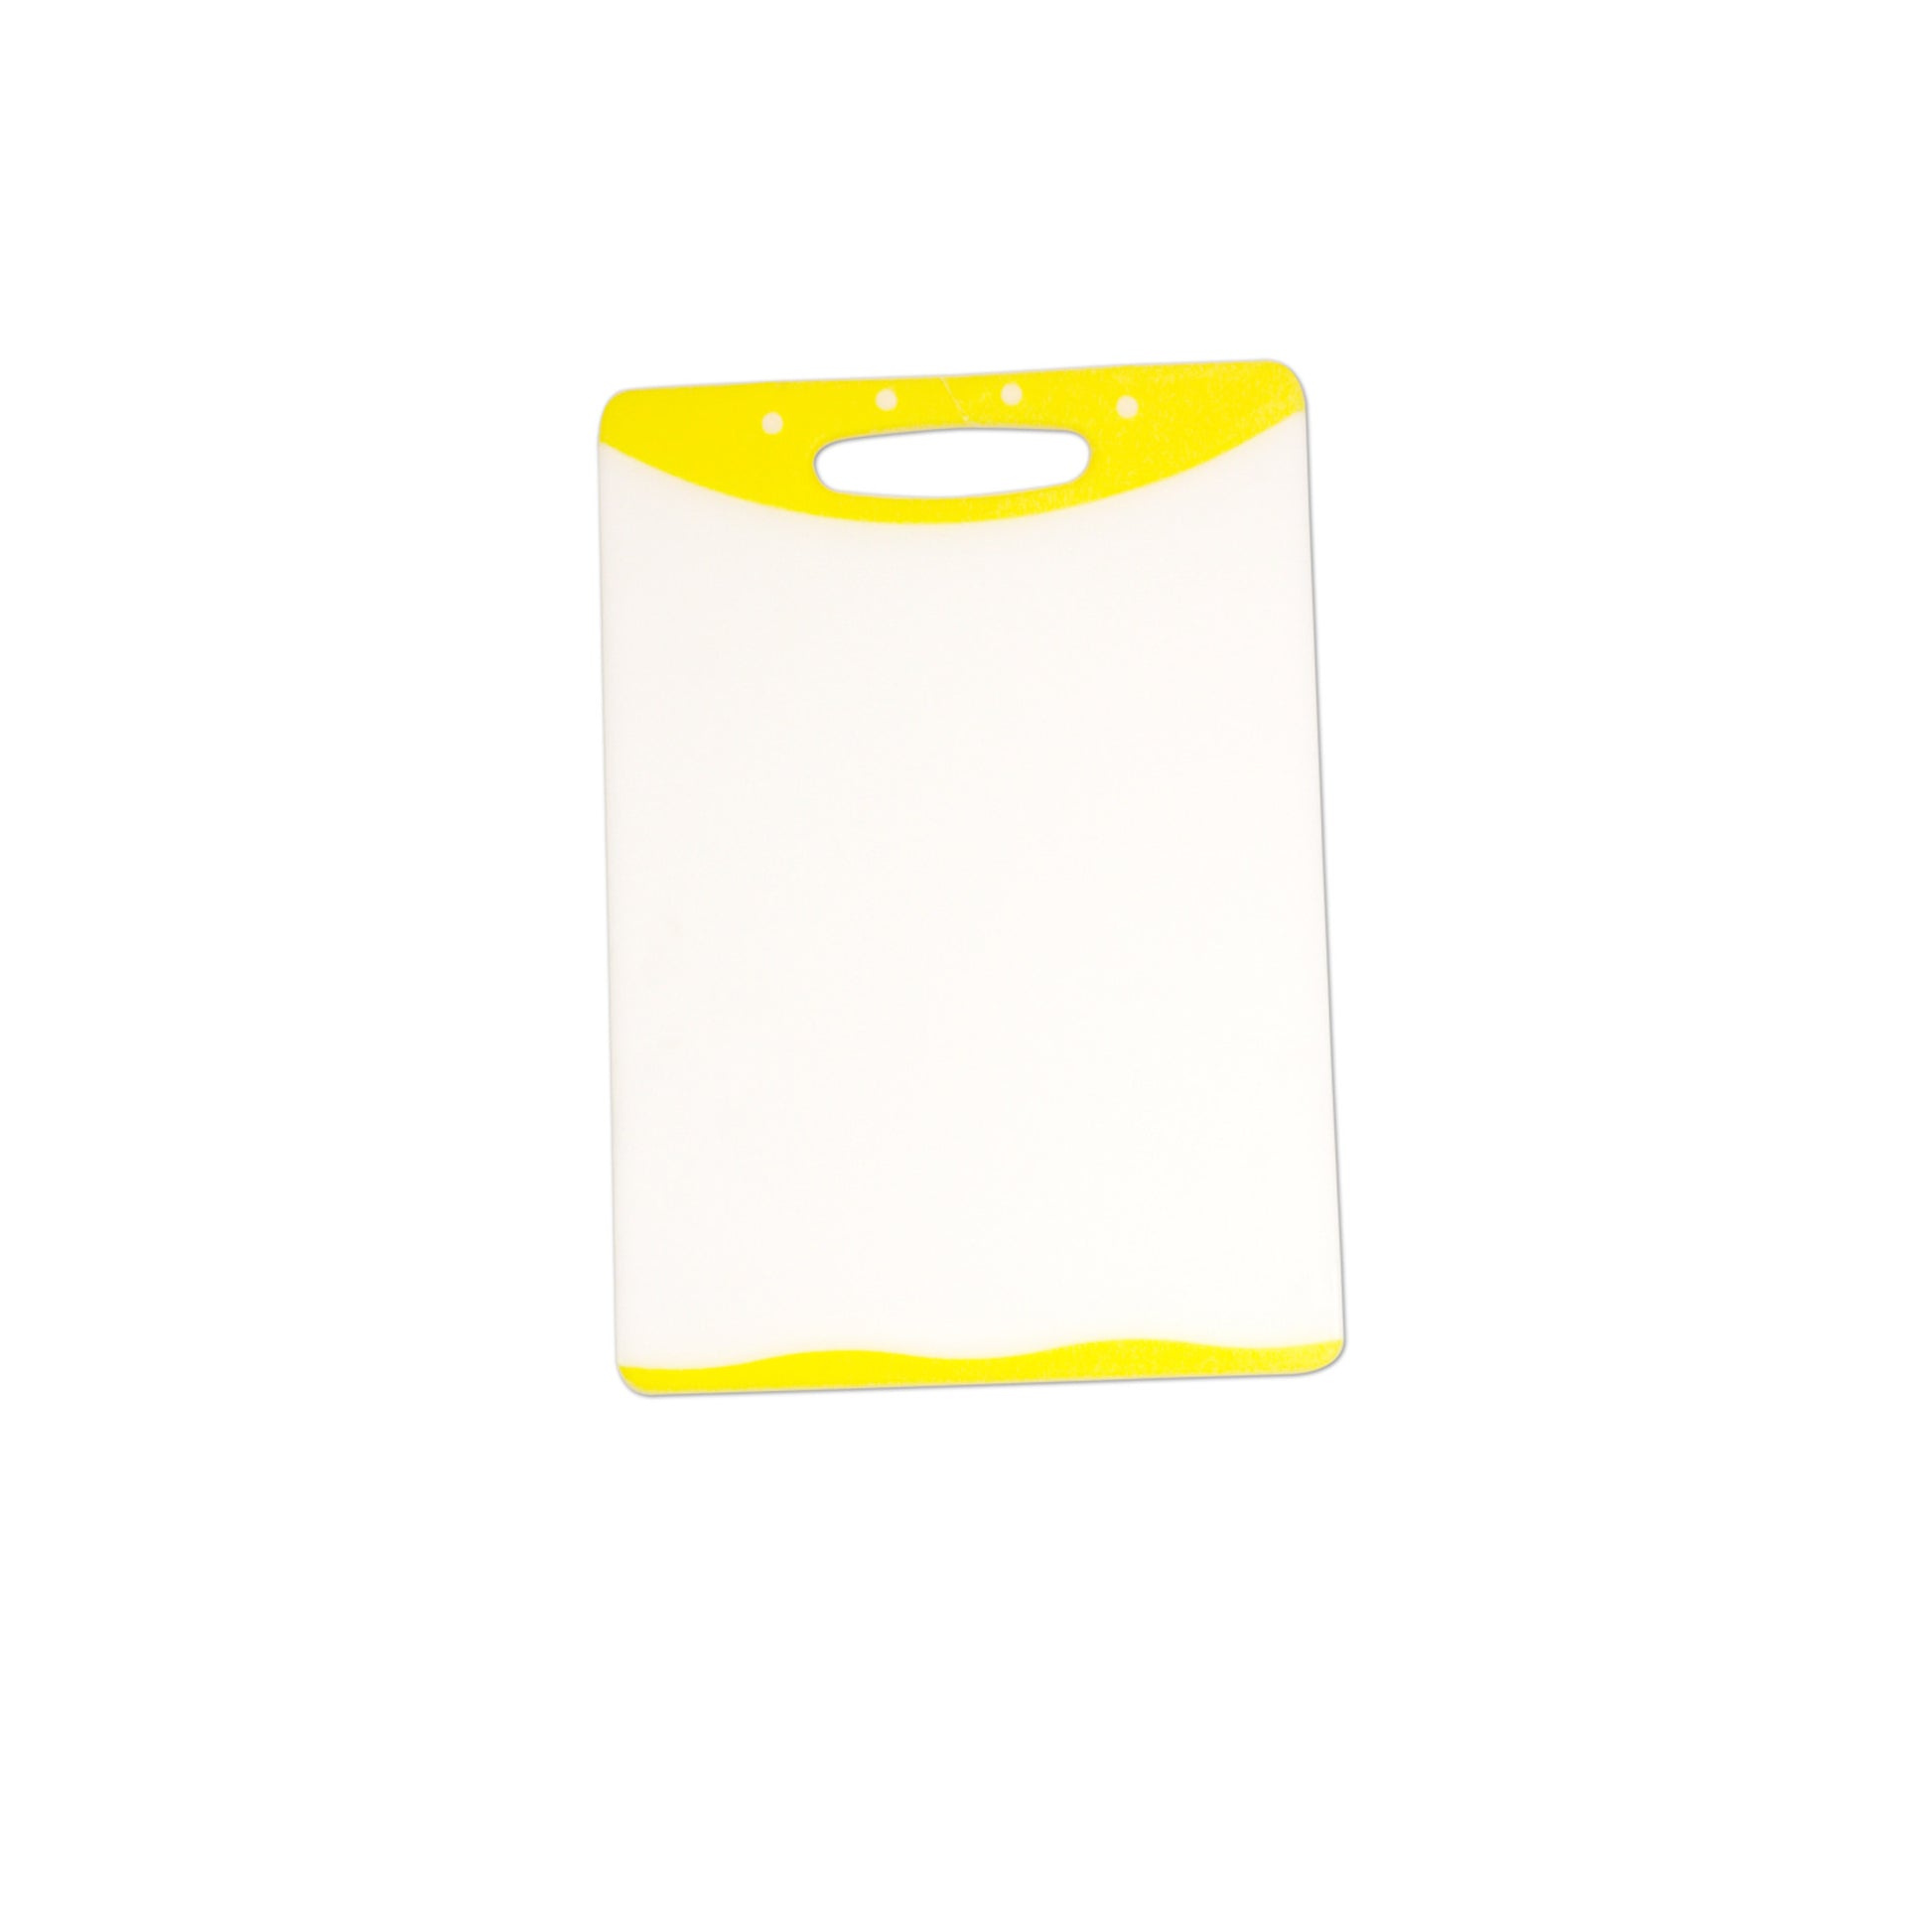 Home Basics 12” x 18" Dual Sided Plastic Cutting Board with Rubberized Non-Slip Edges, Yellow - Yellow